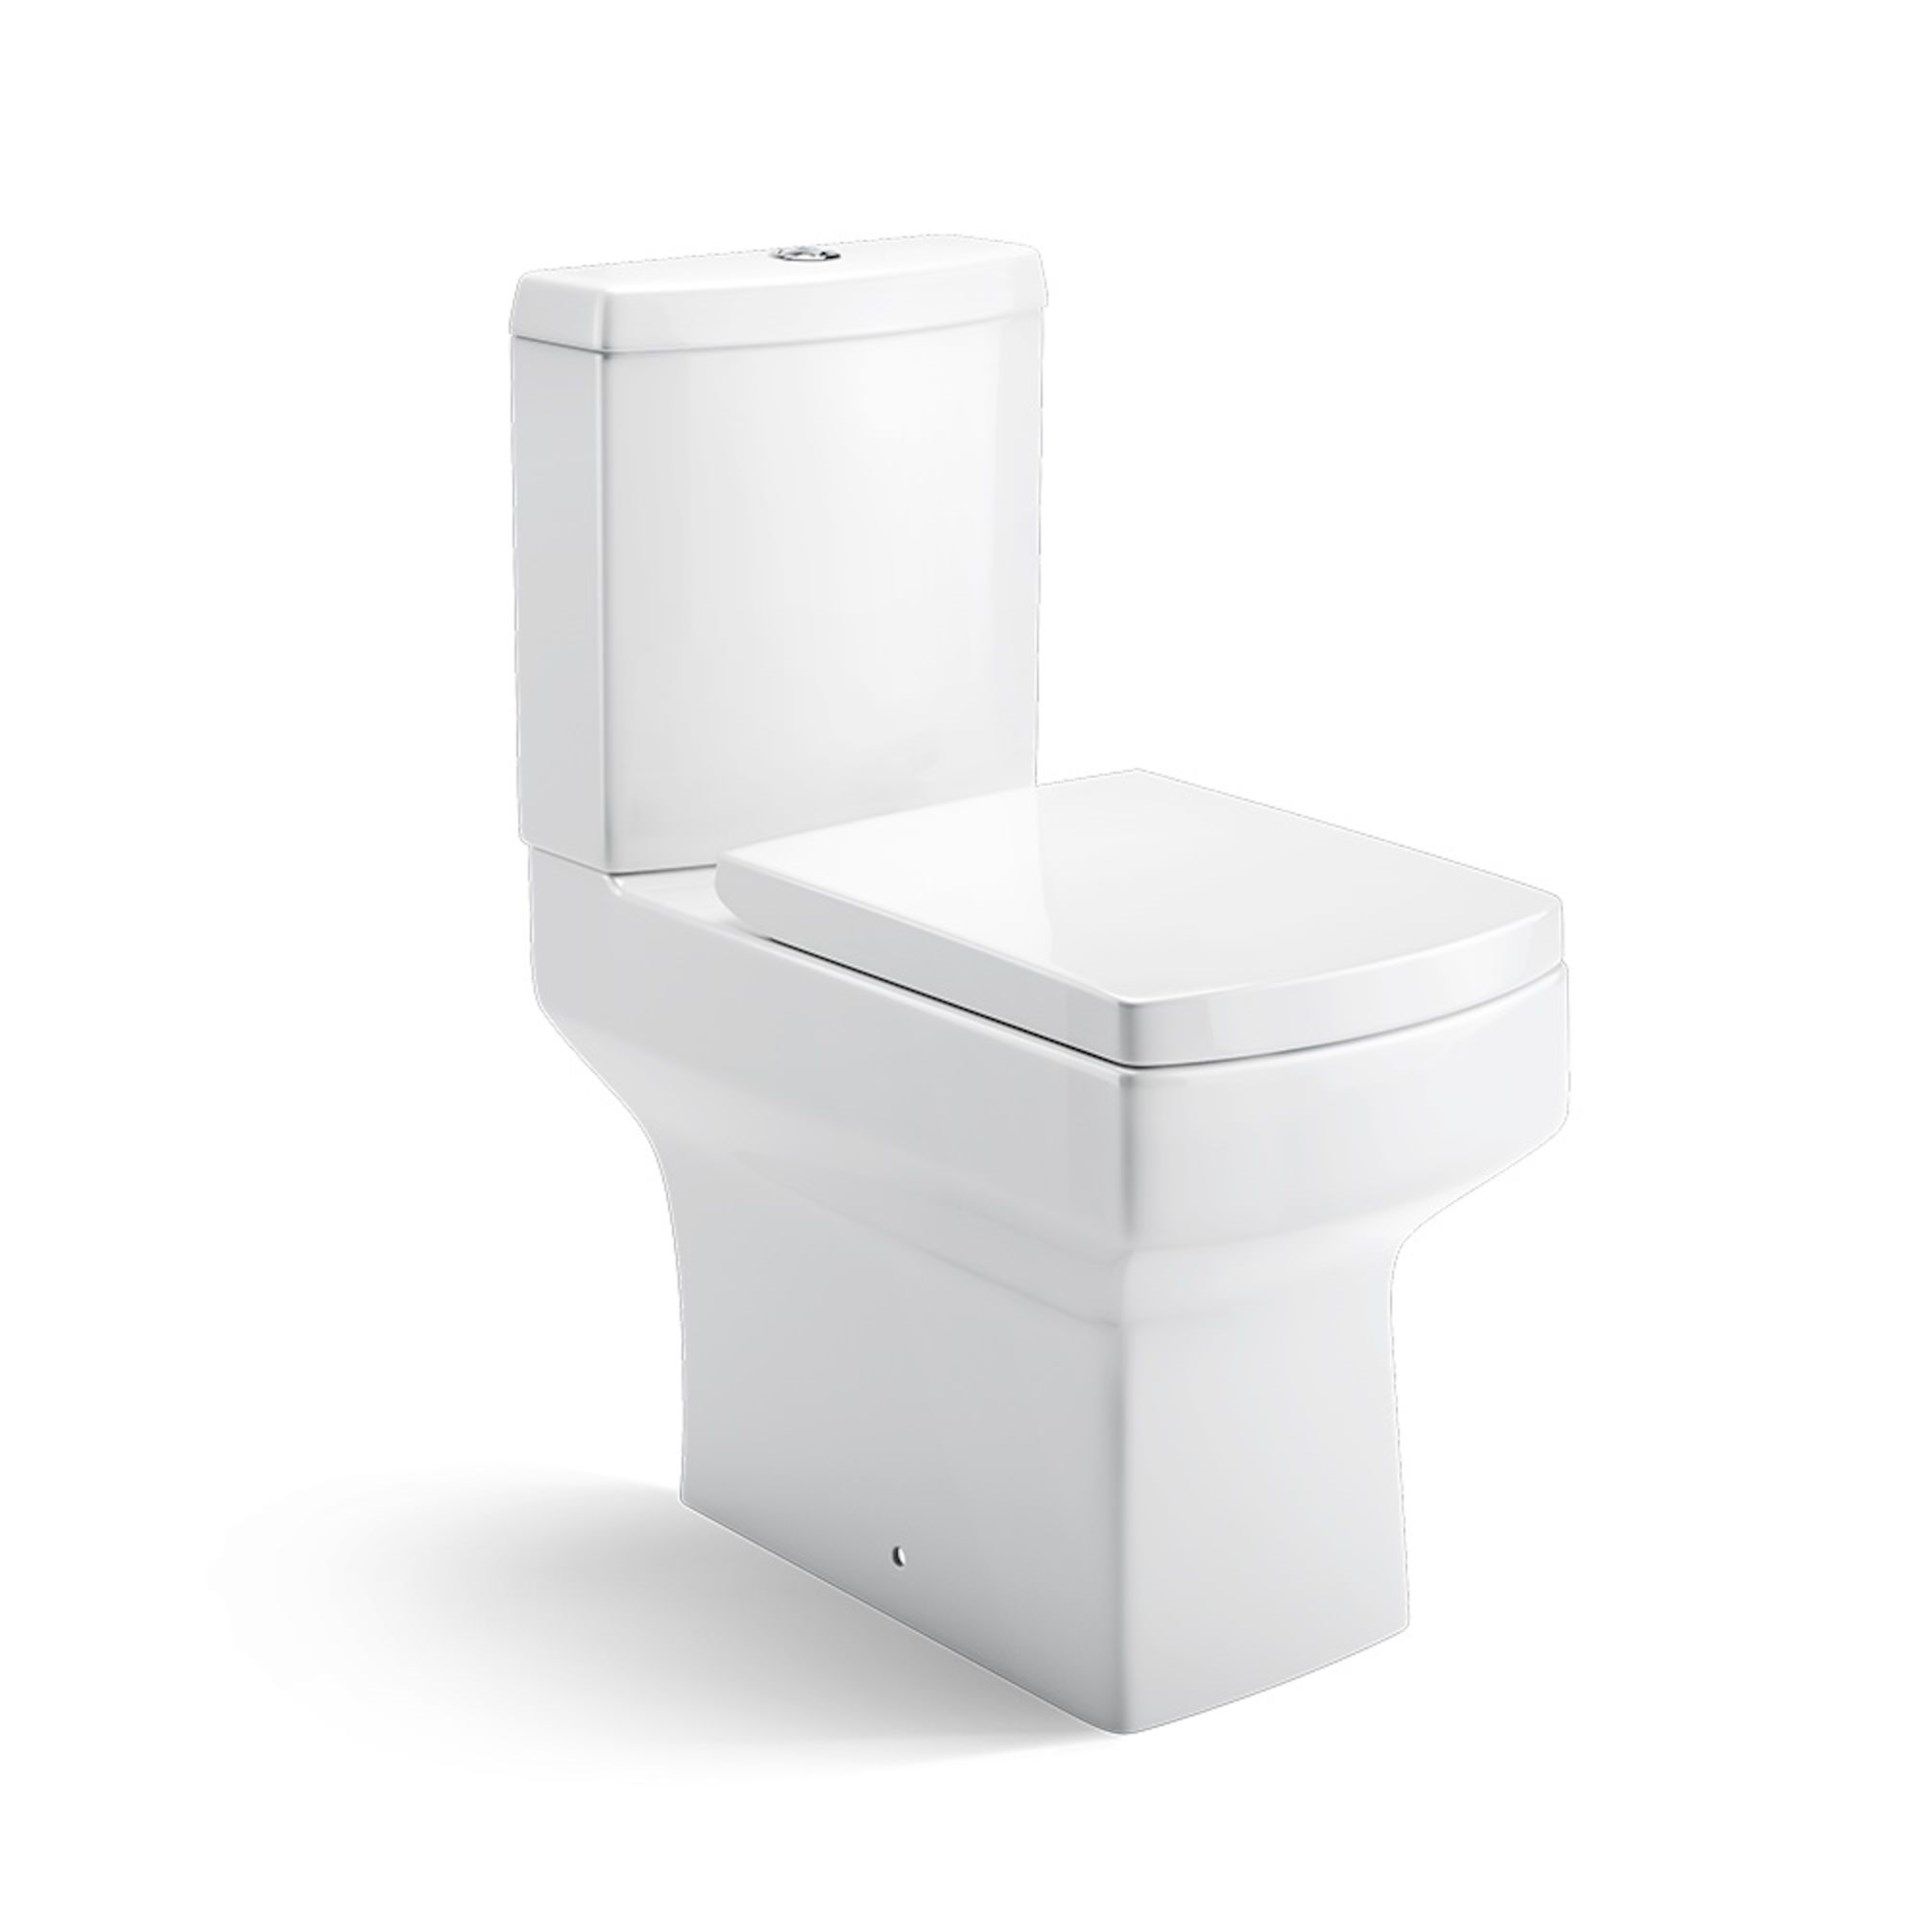 (AA111) Belfort Close Coupled Toilet & Cistern inc Soft Close Seat Made from White Vitreous Chi... - Image 2 of 3